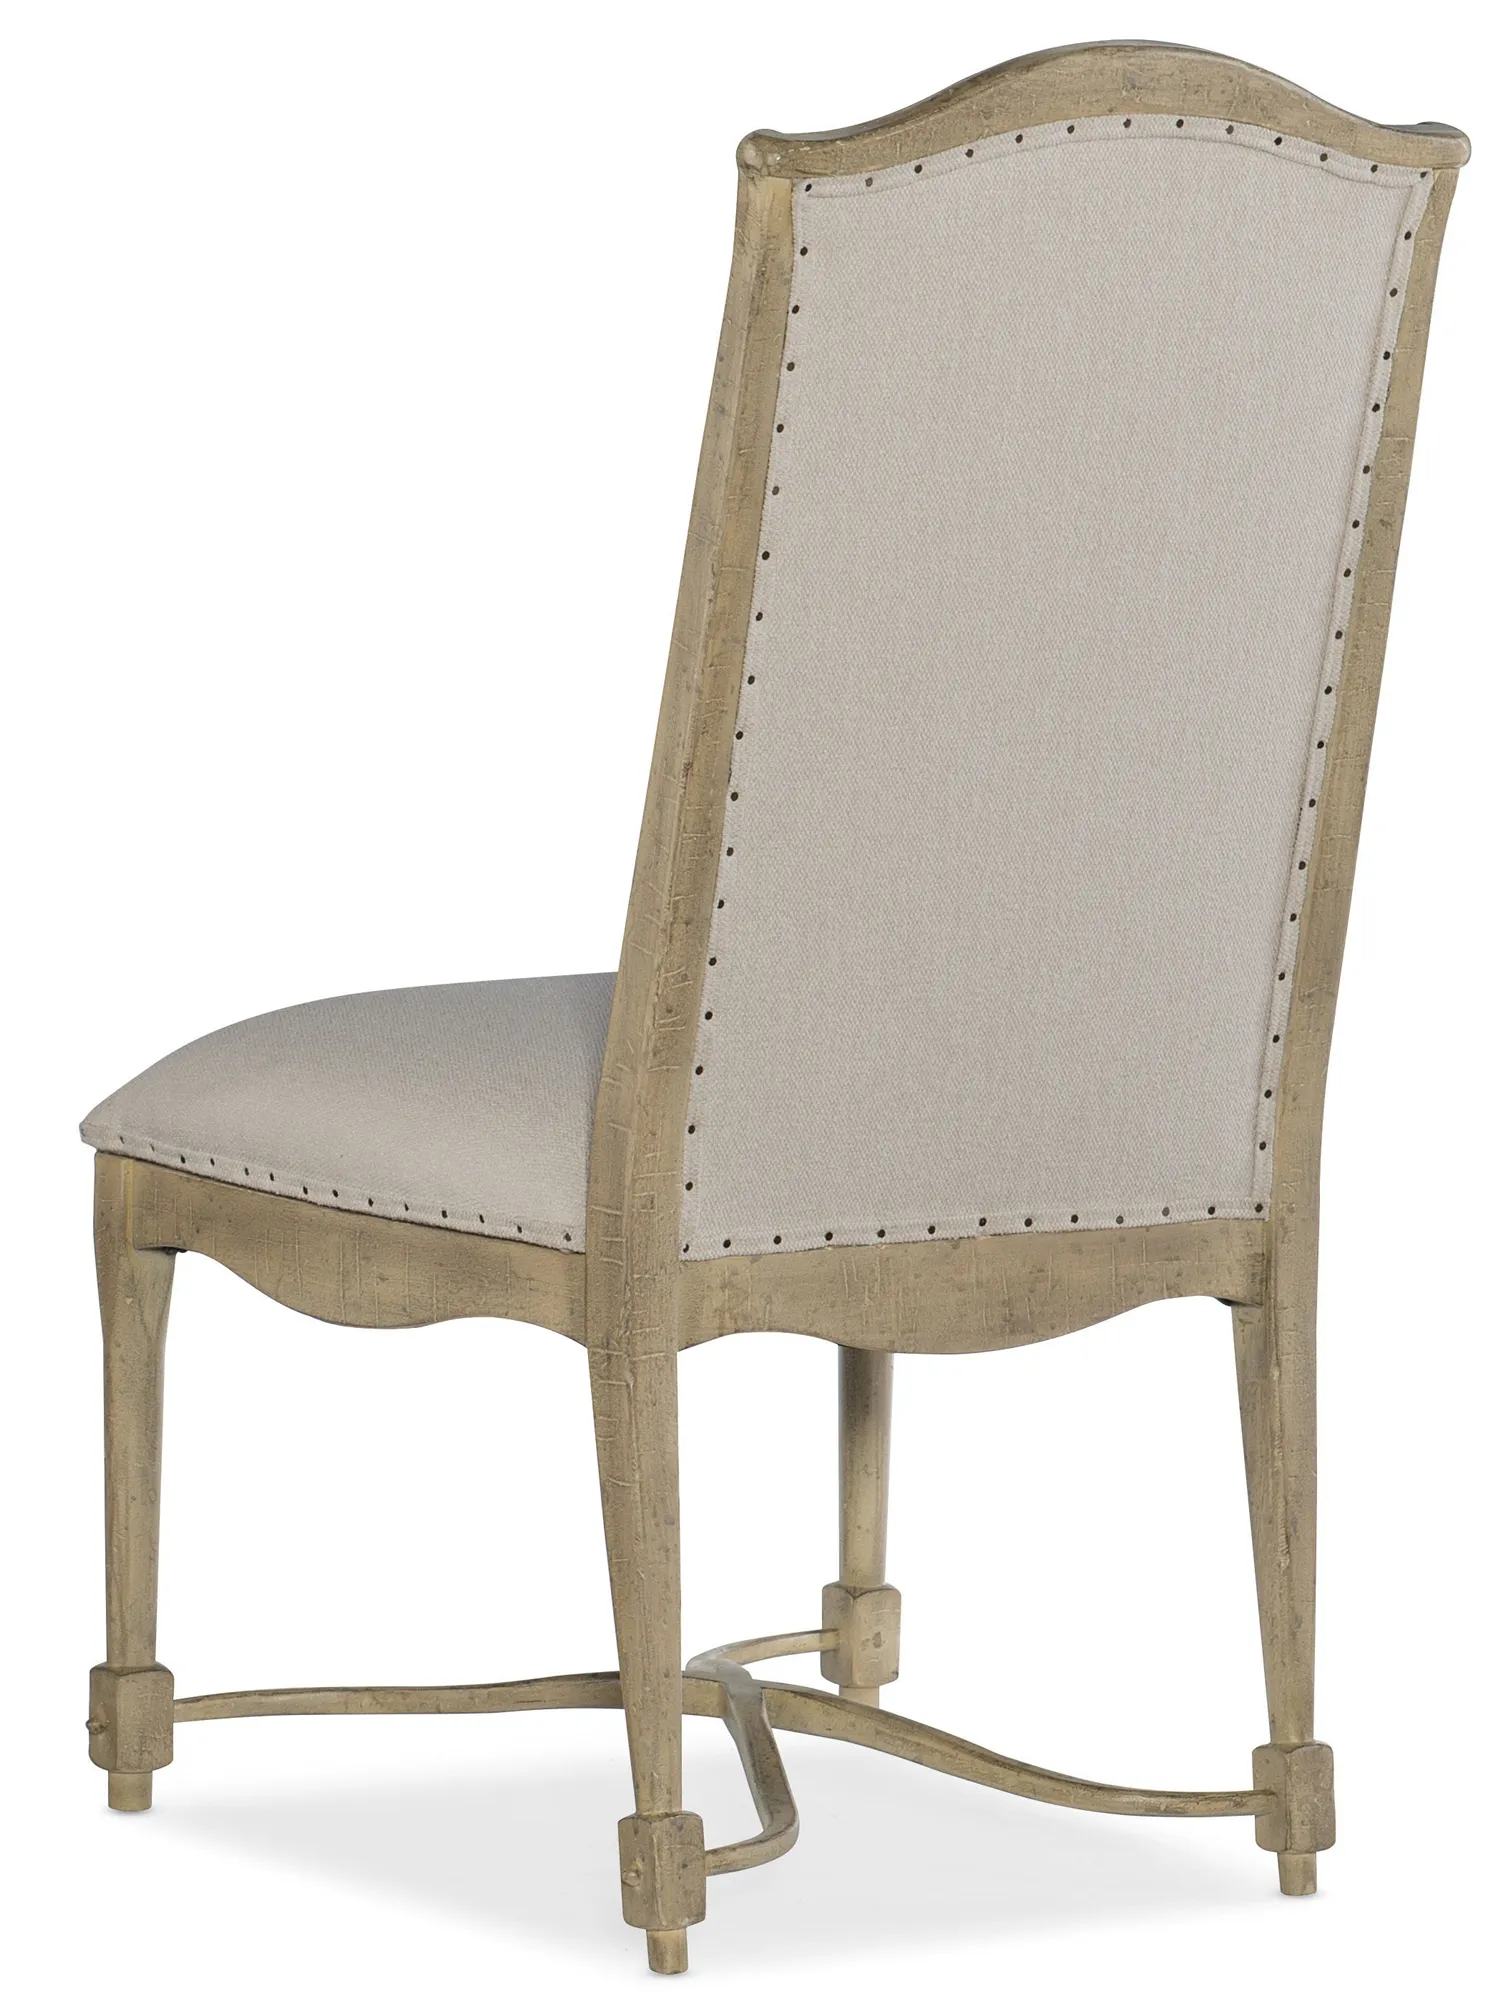 CIAO BELLA UPHOLSTERED BACK NATURAL FINISH SIDE CHAIR